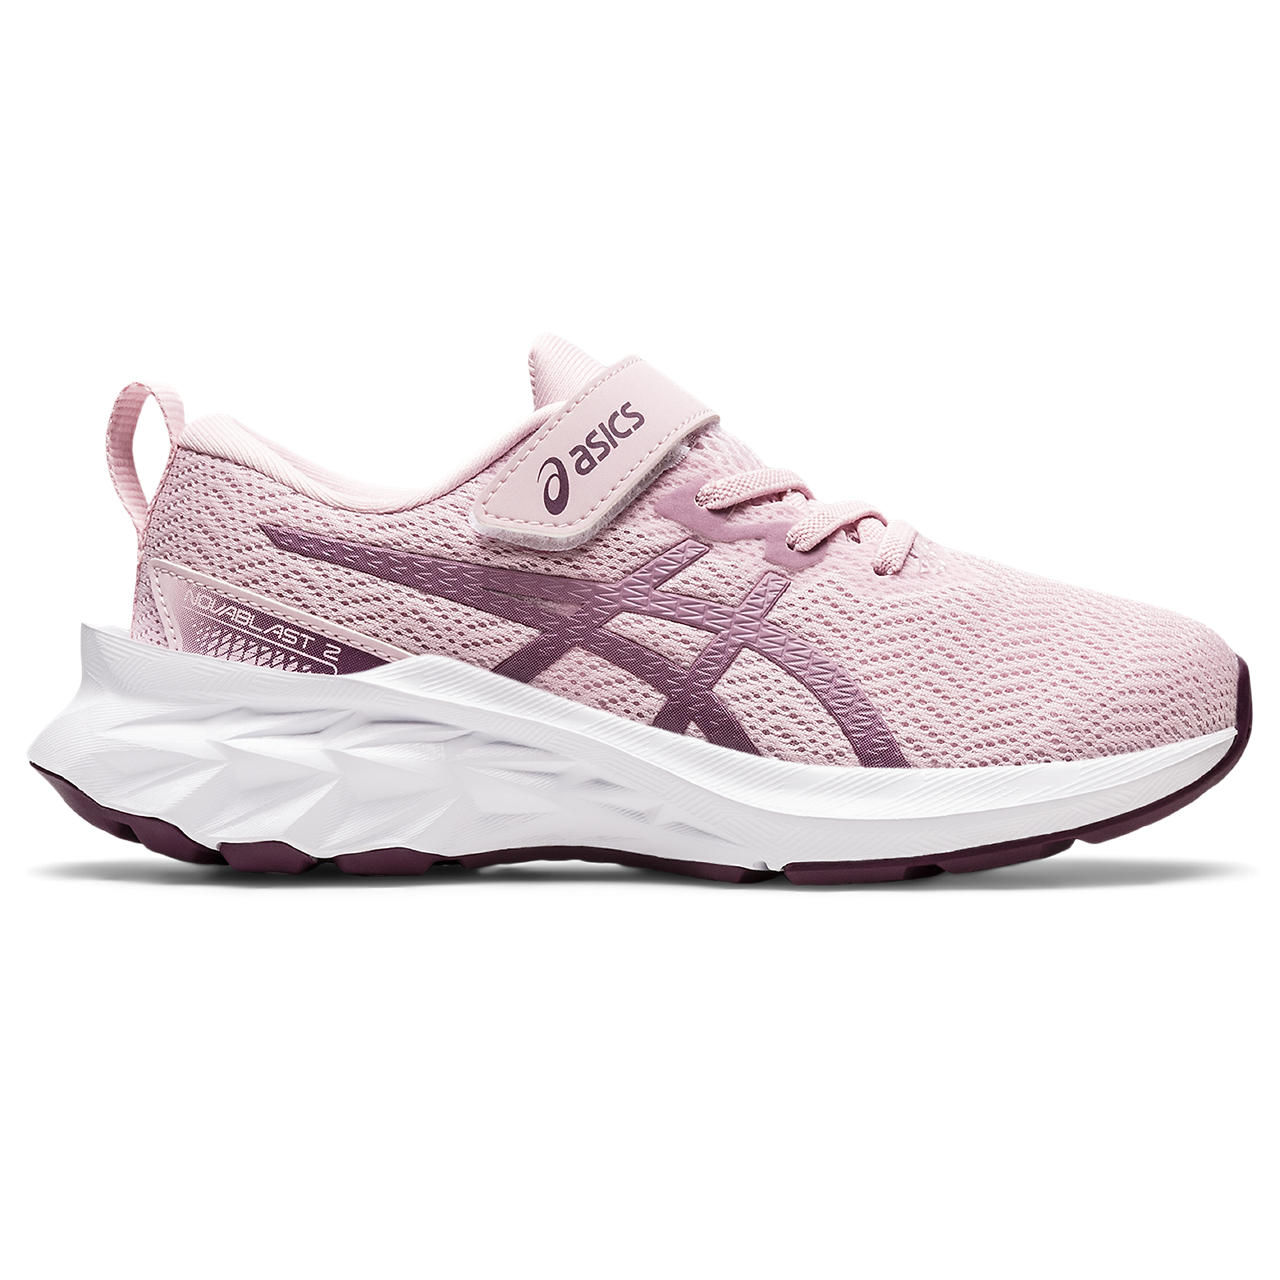 ASICS NOVABLAST 2 PS, BARELY ROSE/PURE SILVER, swatch